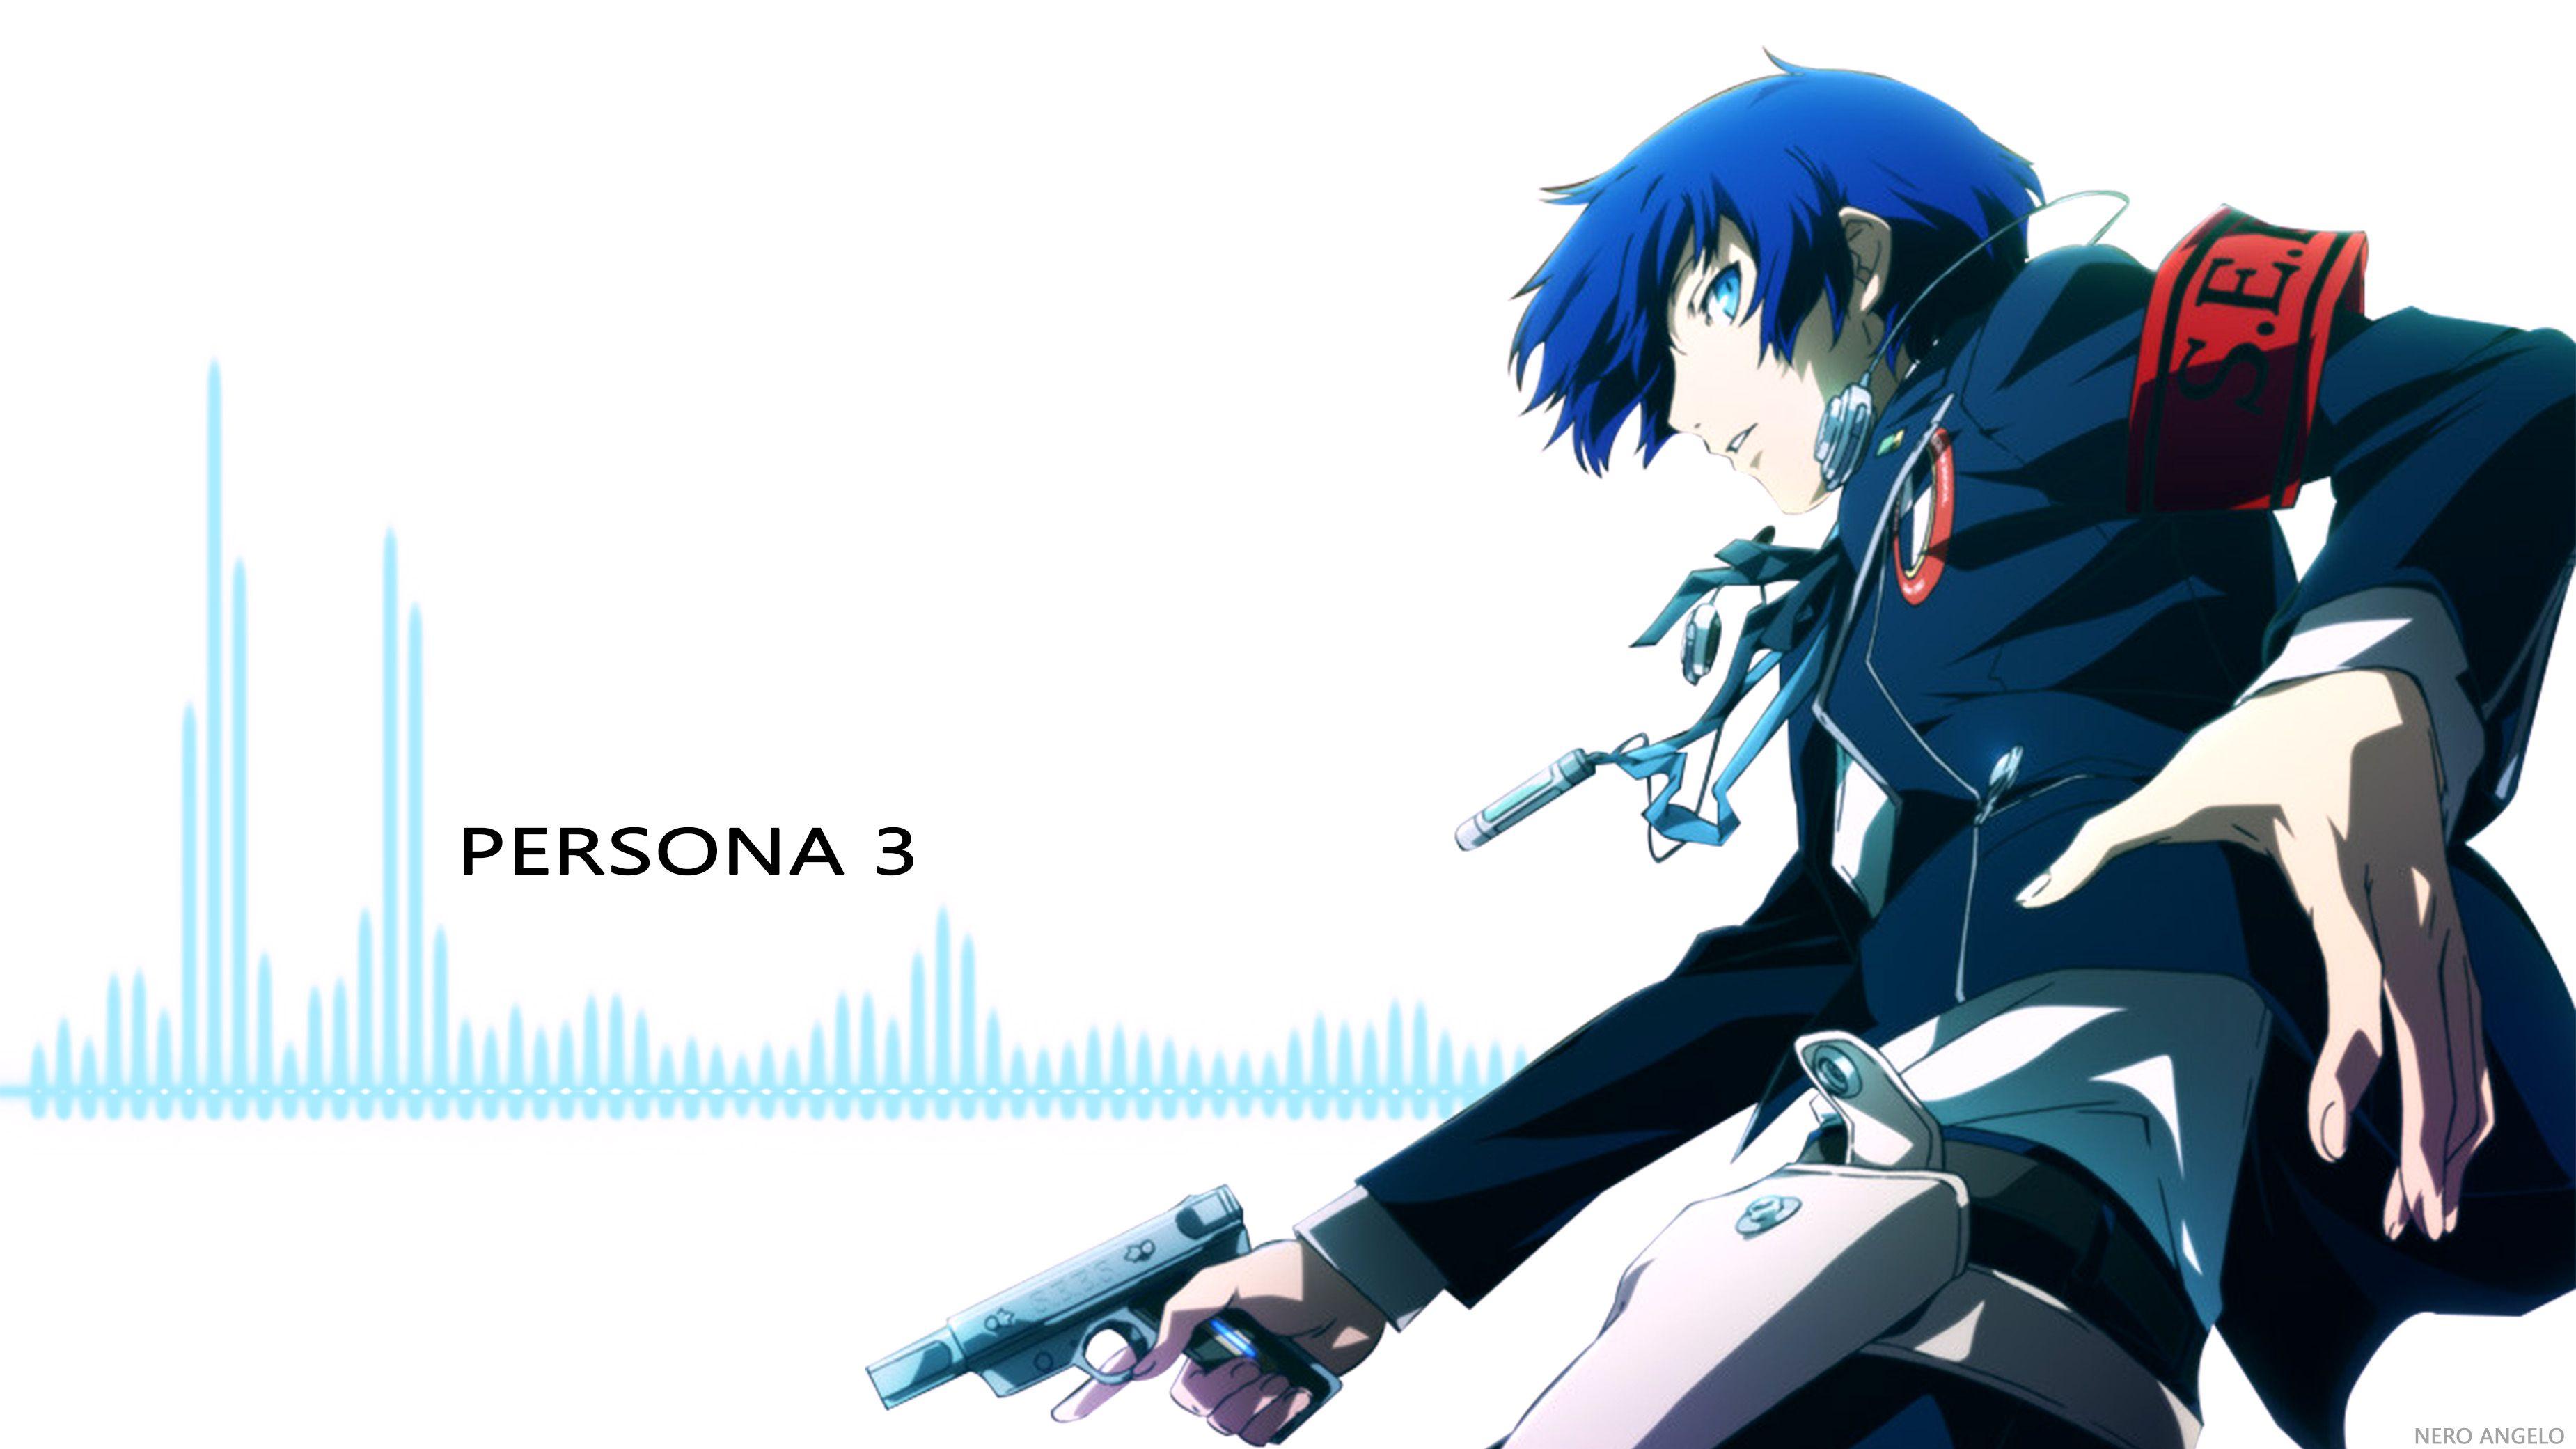 persona 3 the movie  Wallpapers